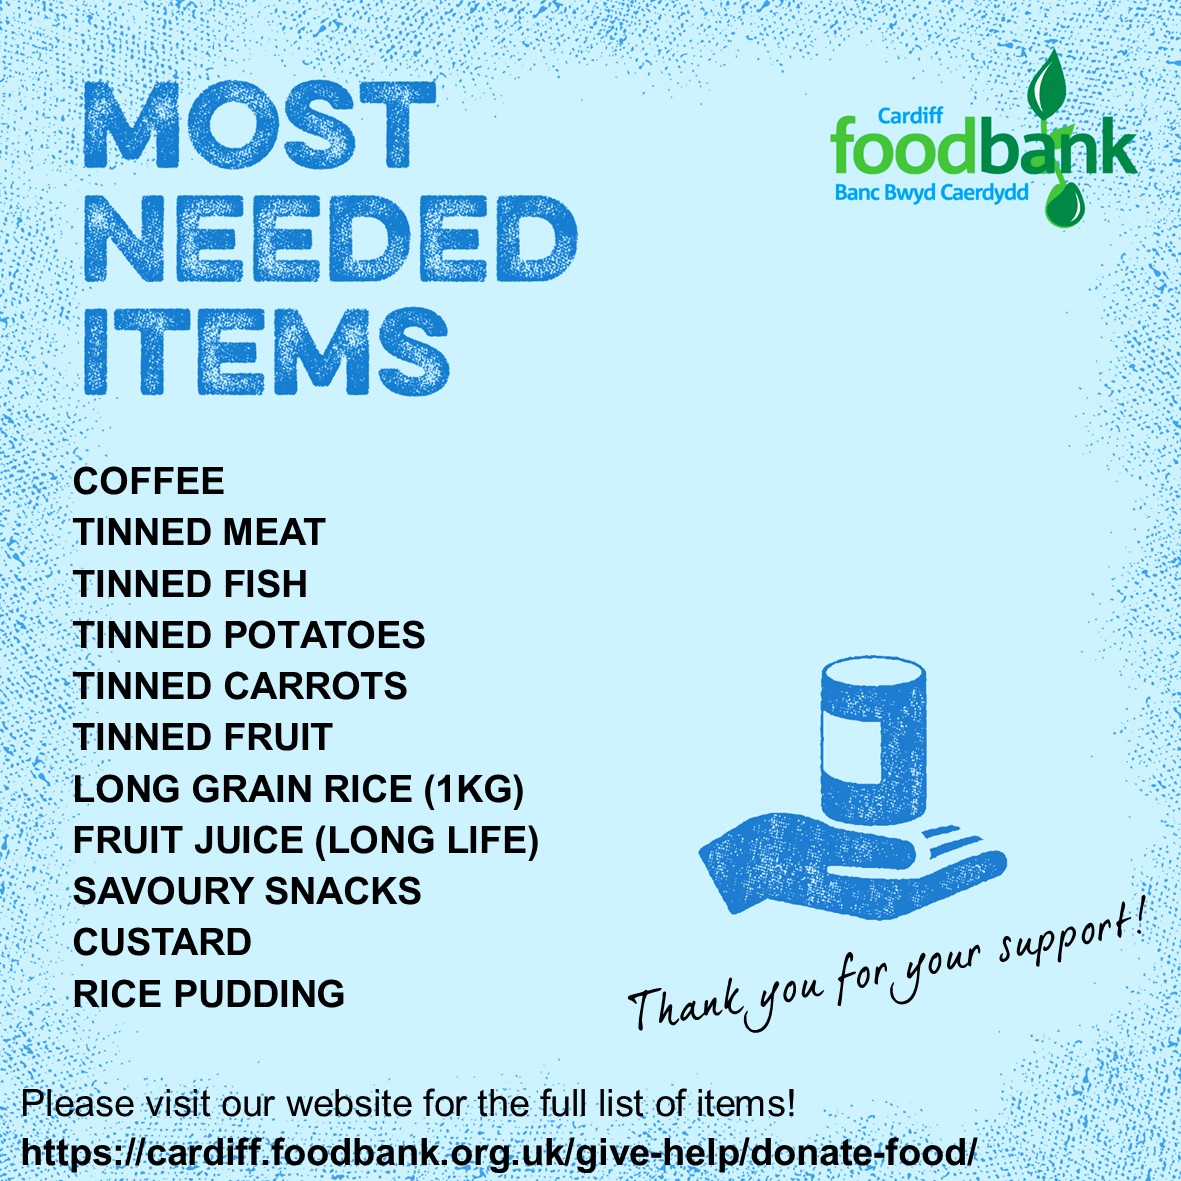 We've updated our most needed items list which you can view here: bit.ly/2Ltsks3 Also, between 1-3 December you will be able to donate to us at Culverhouse Cross, St Mellons & Western Ave @Tesco stores. #EveryCanHelps us support people in need across Cardiff. 💚🙏